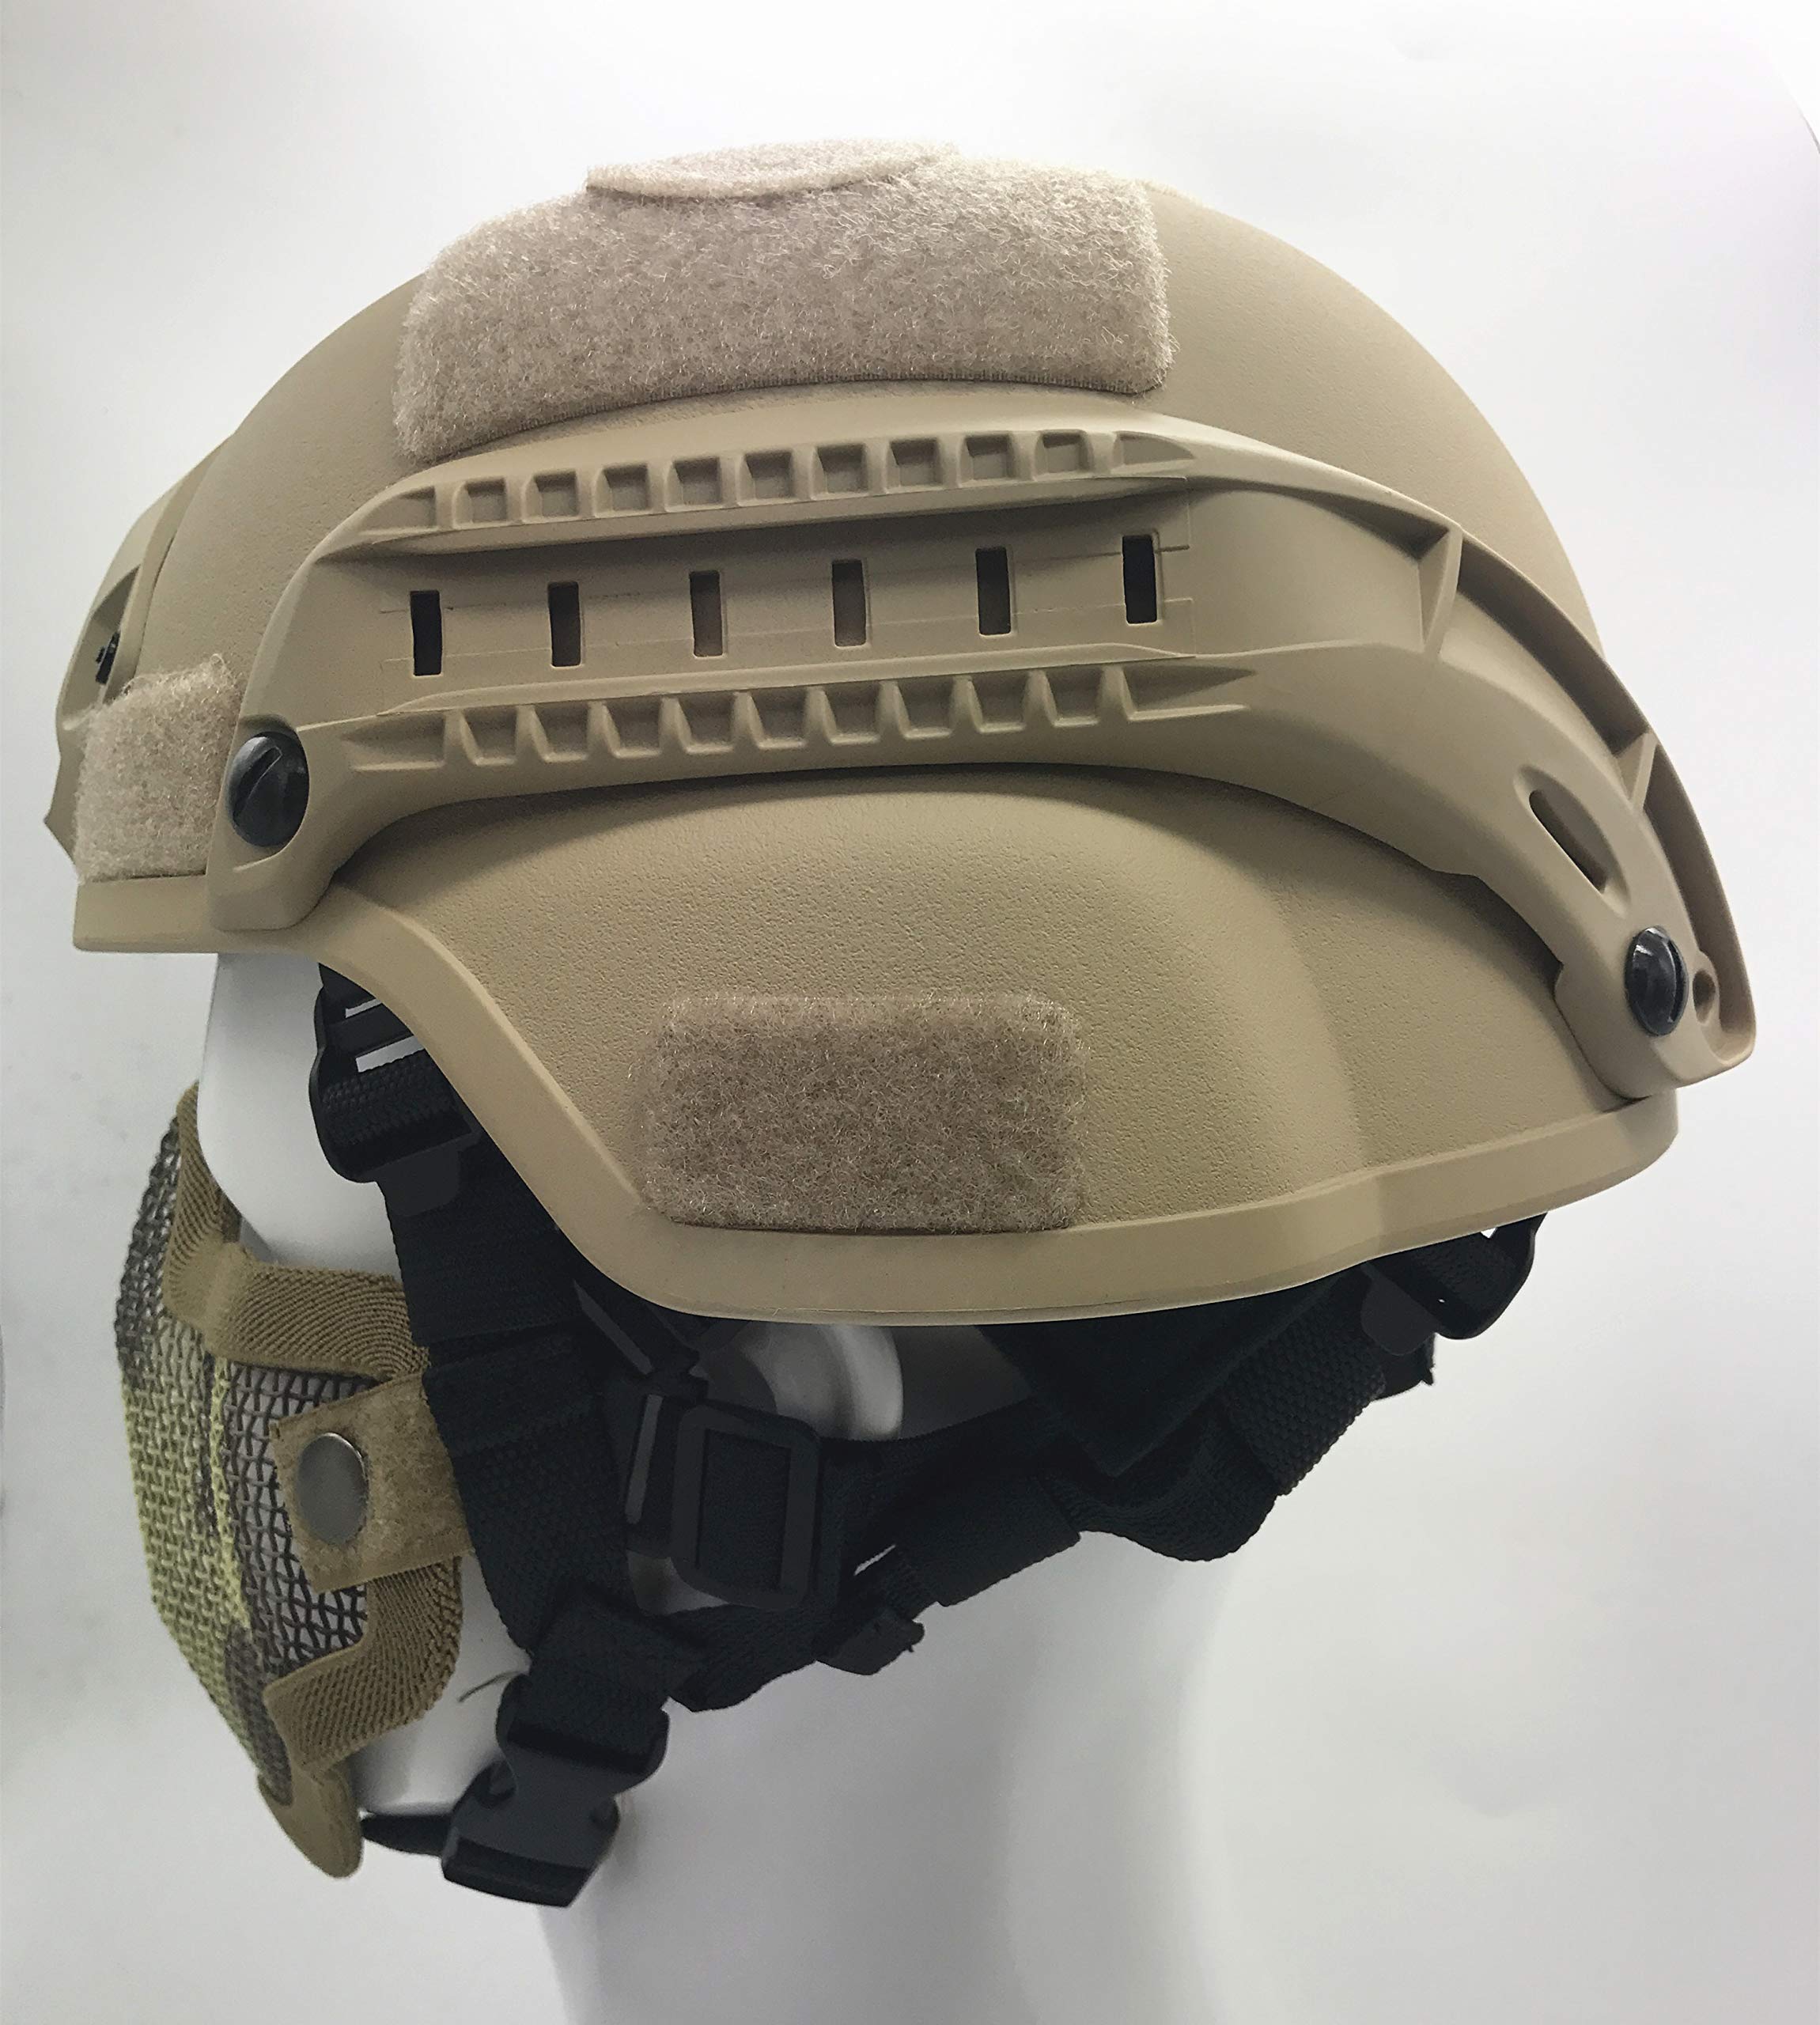 Willbebest Tactical Airsoft Paintball MICH 2000 Helmet with Side Rail & Wing-Loc Adapter, Comes with a Half Face Metal Mesh Airsoft Mask